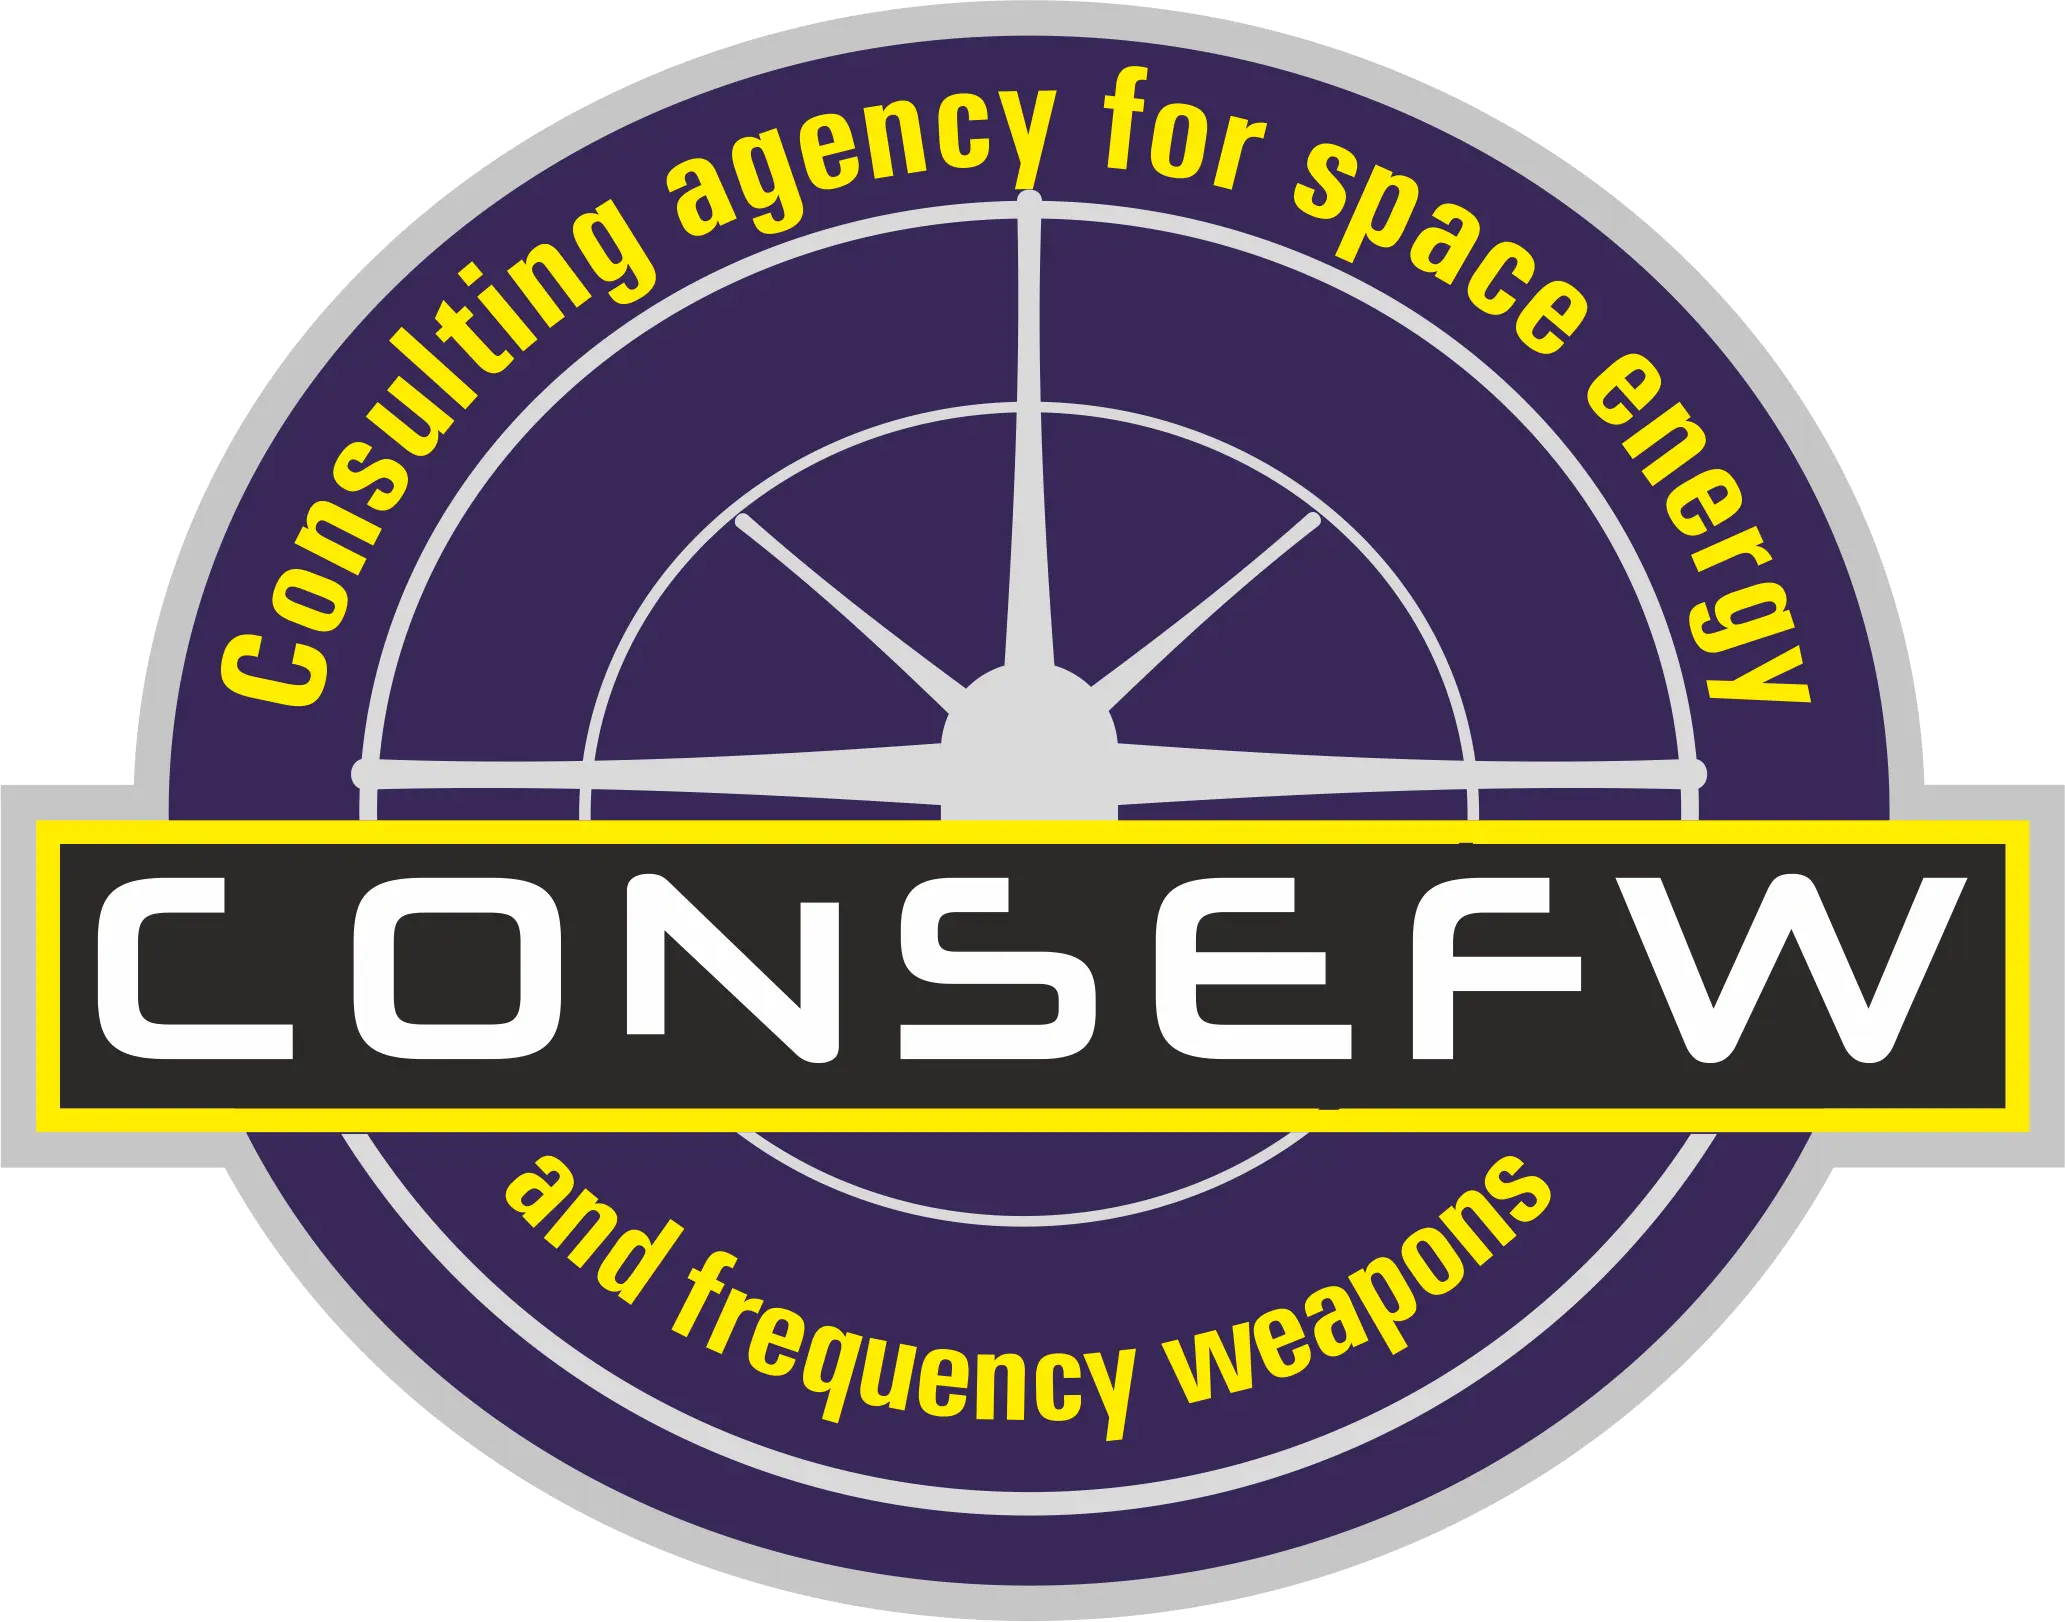 CONSEFW consulting agency for space energy and frequency weapons USA